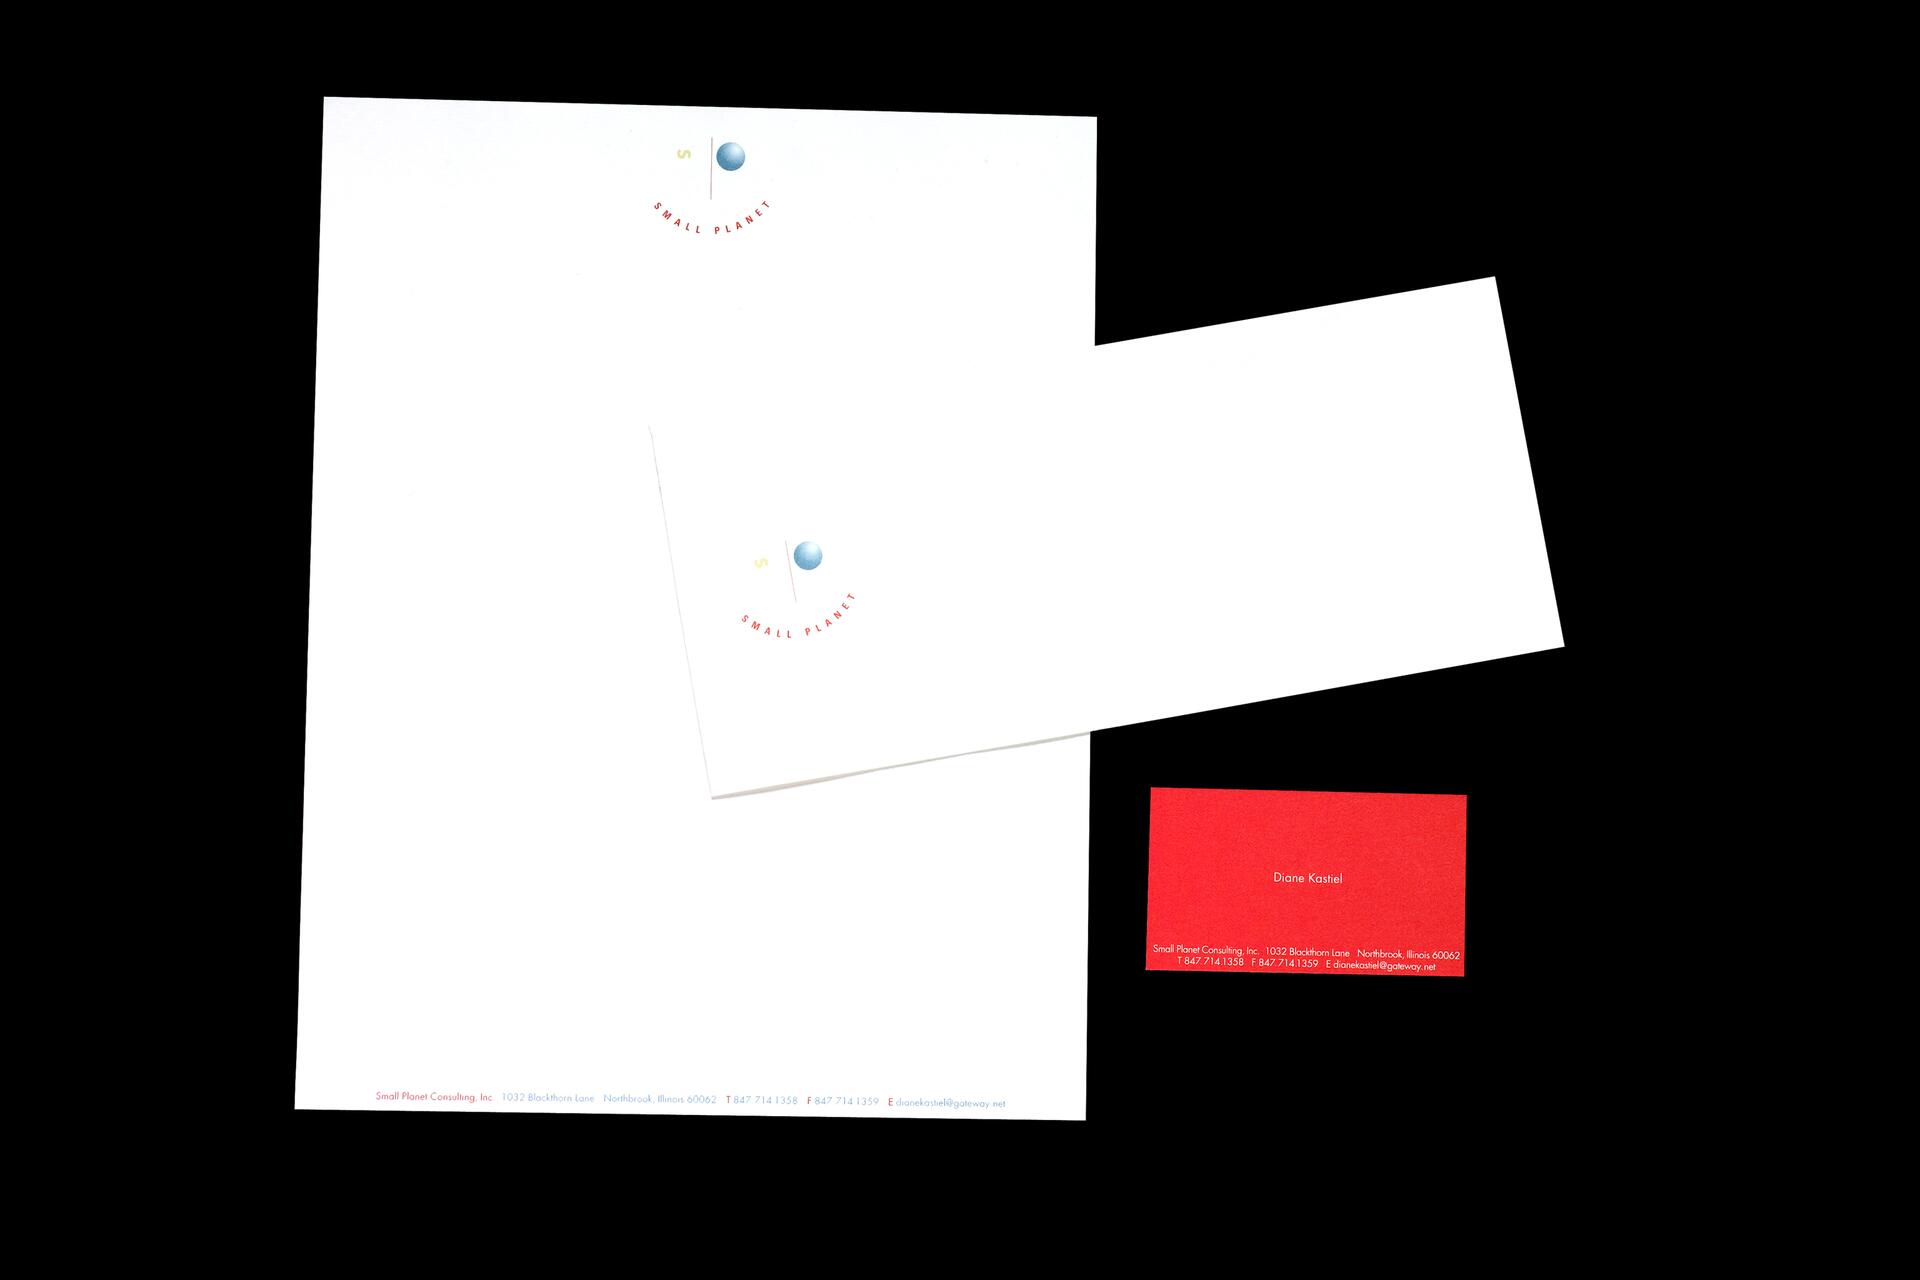 05A-26_Small Planet Consulting Stationery Items_Barbara Lynk